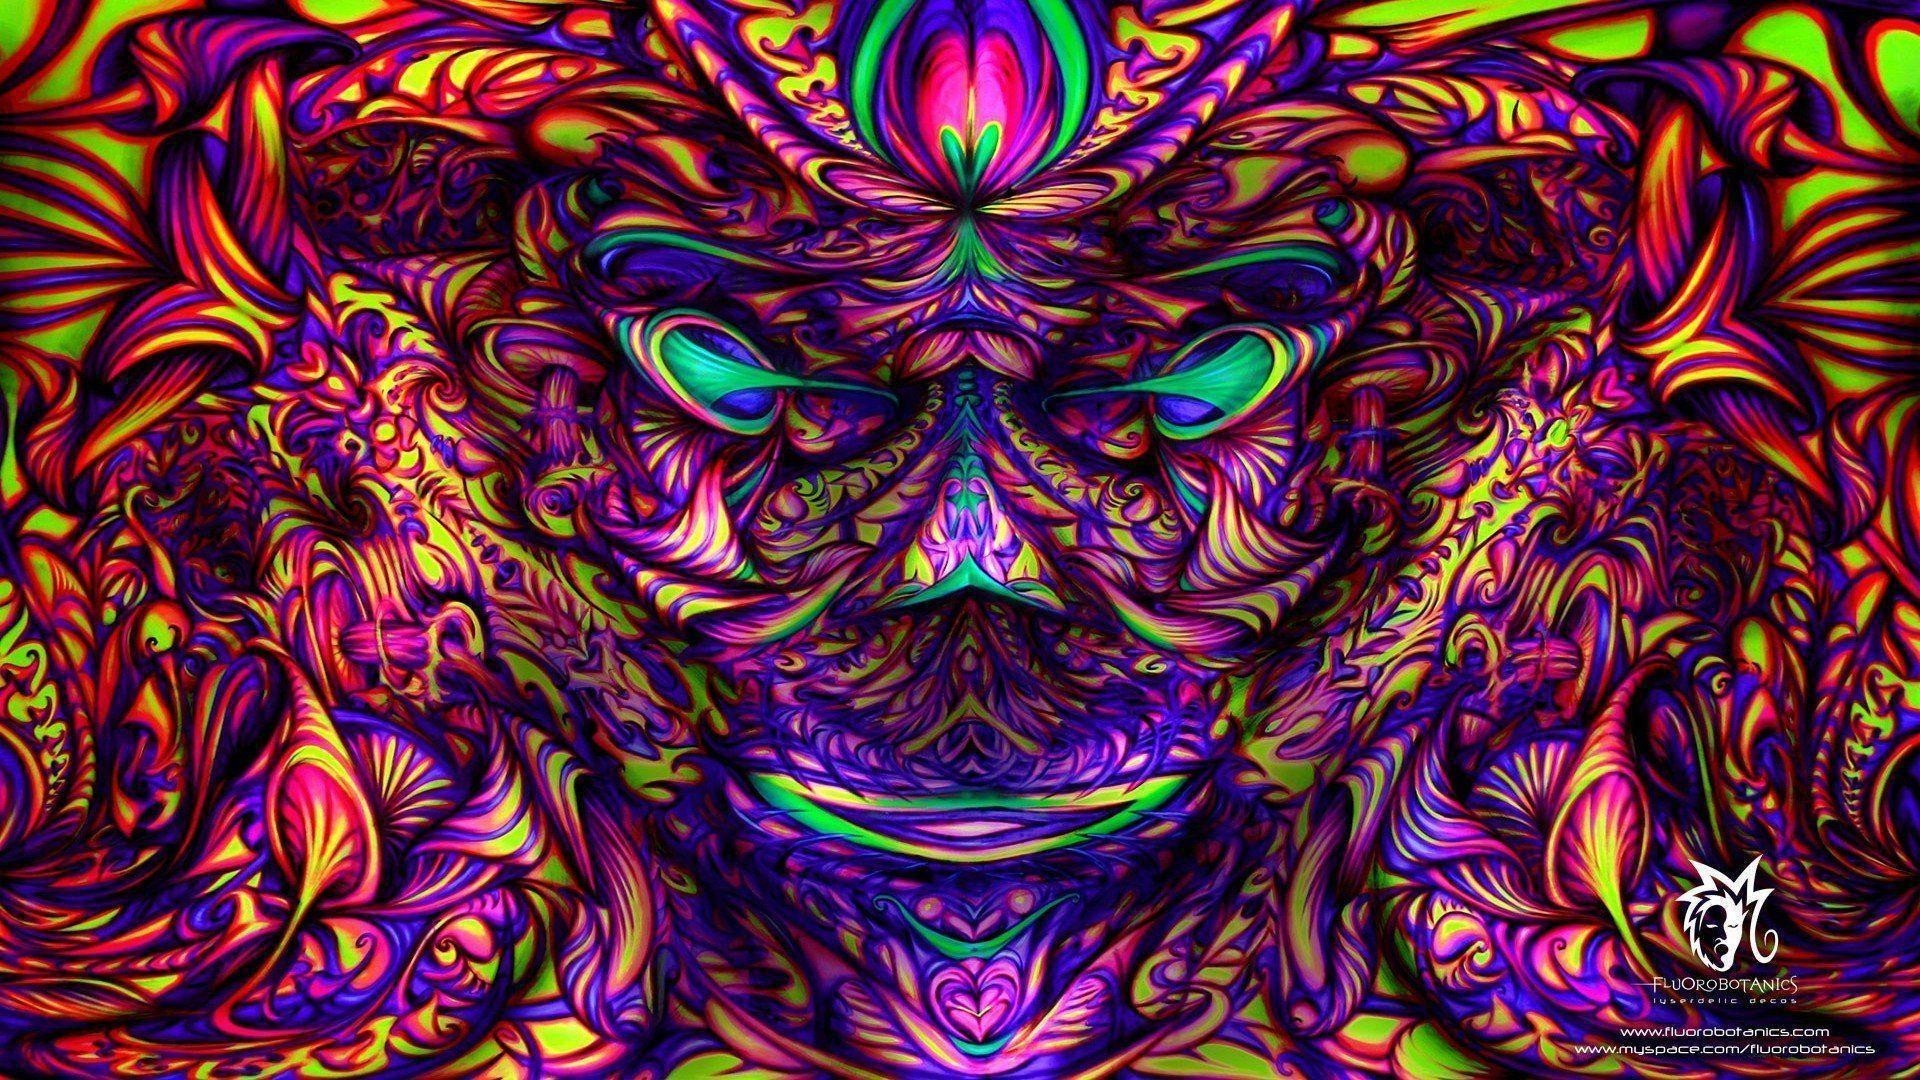 1920x1080 Hd Trippy Twitter Wallpapers Unique Psytrance Wallpapers Wallpaper Cave Of  Hd Trippy Twitter Wallpapers Unique Trippy